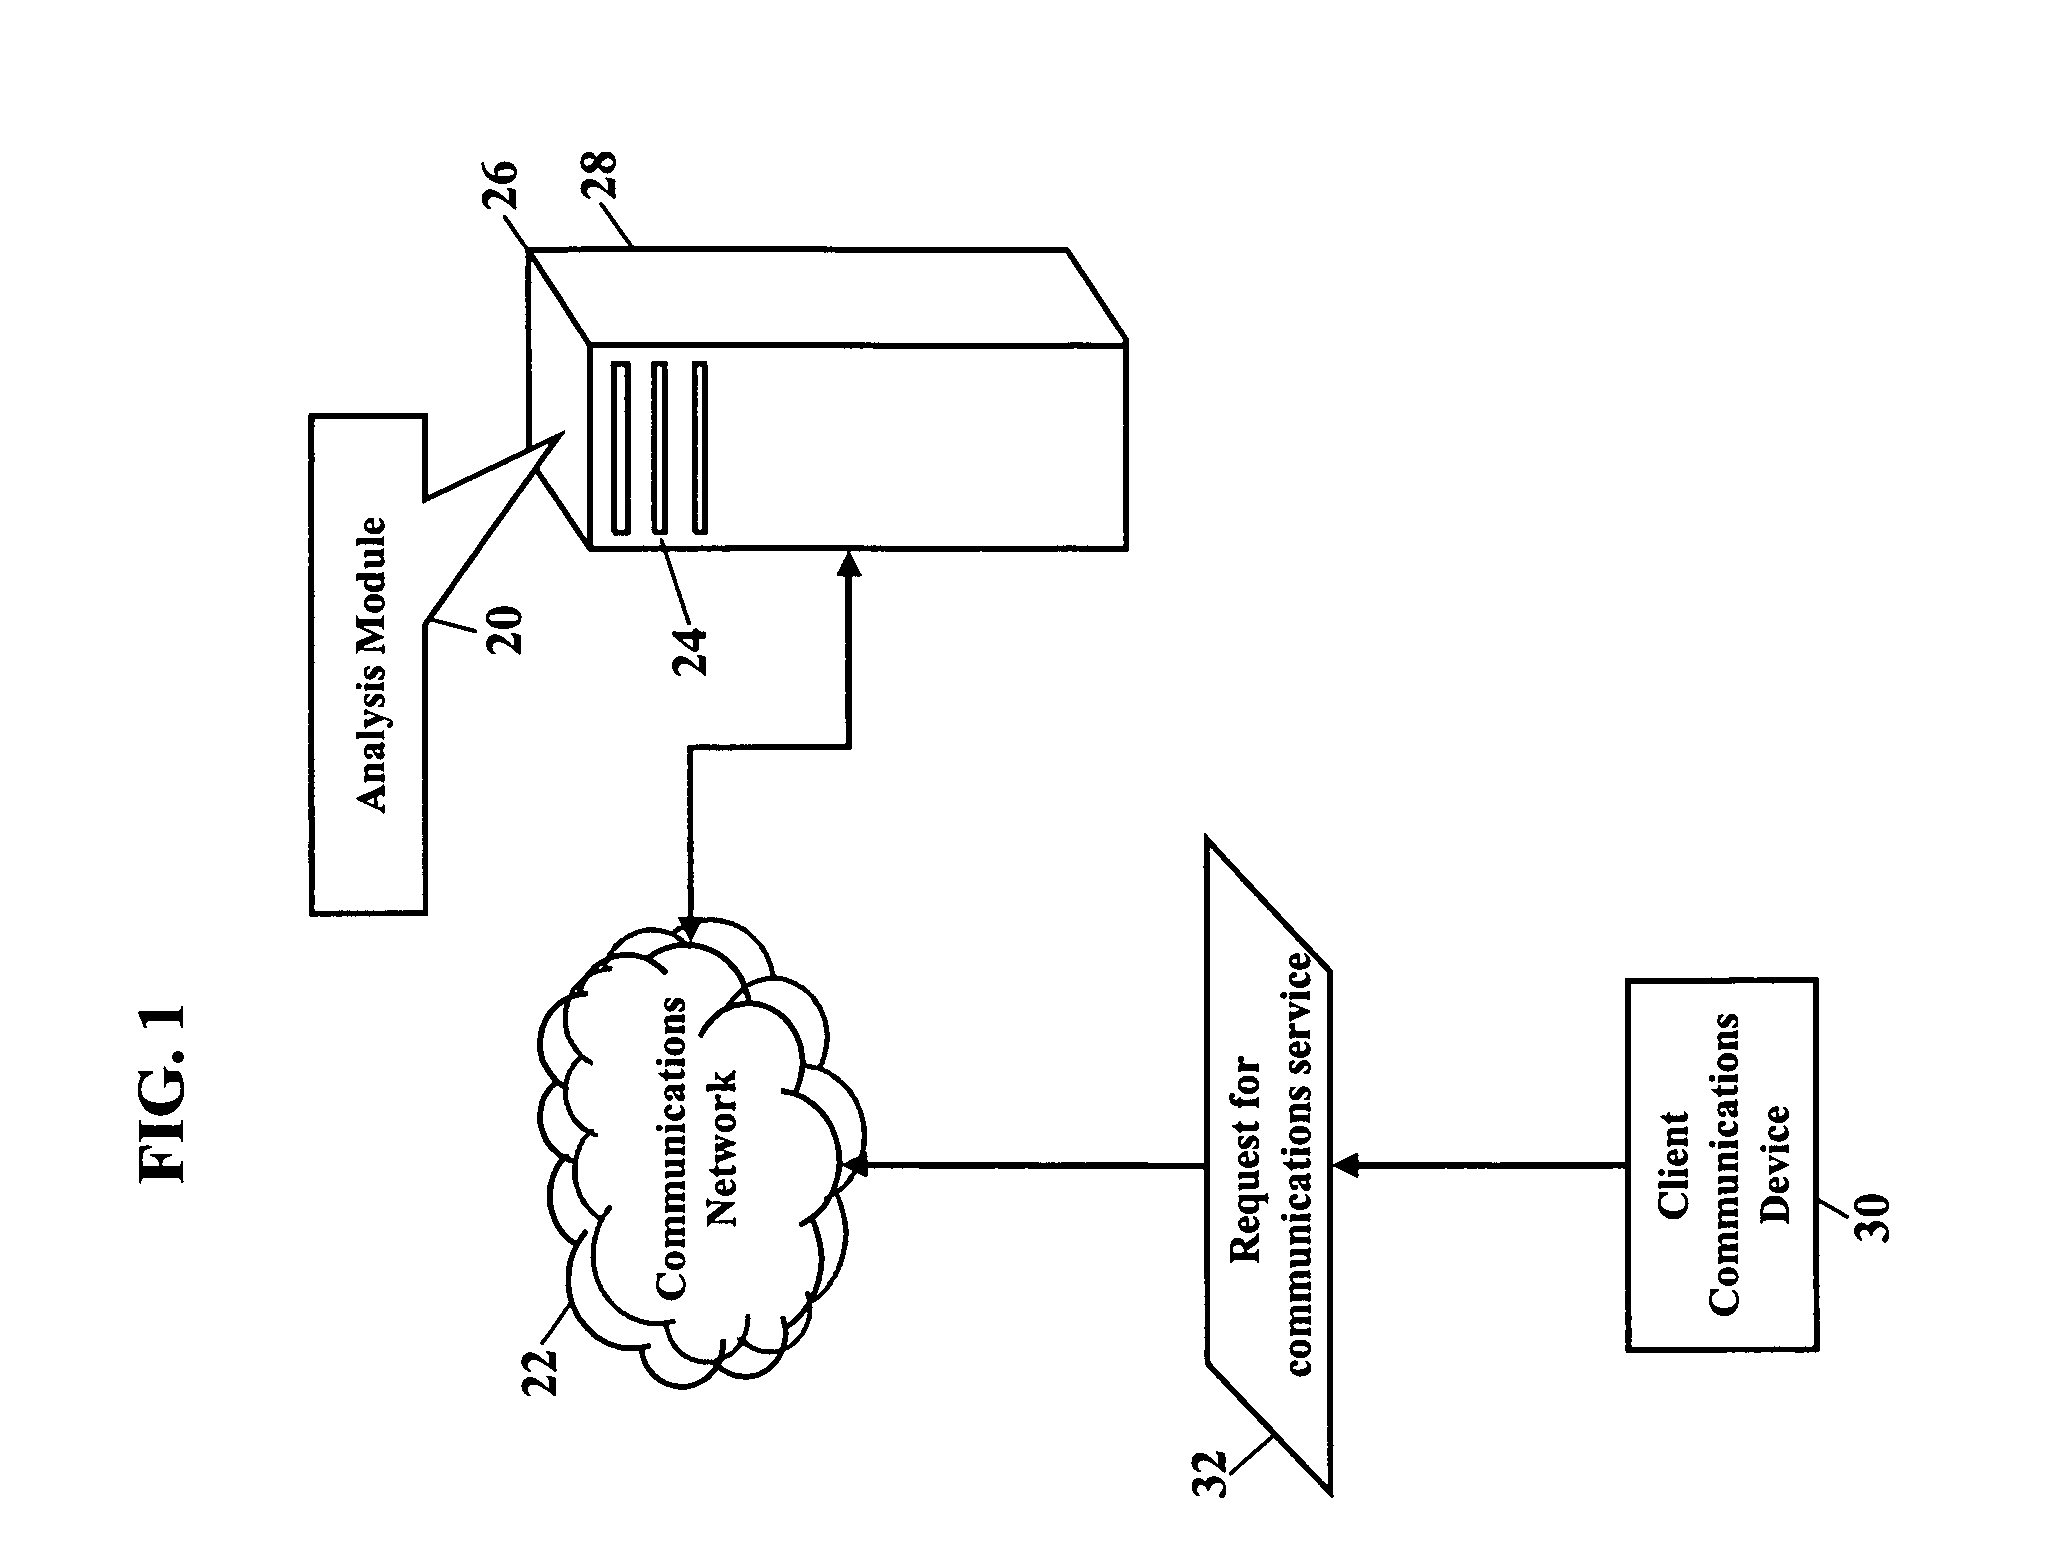 Methods for providing communications services